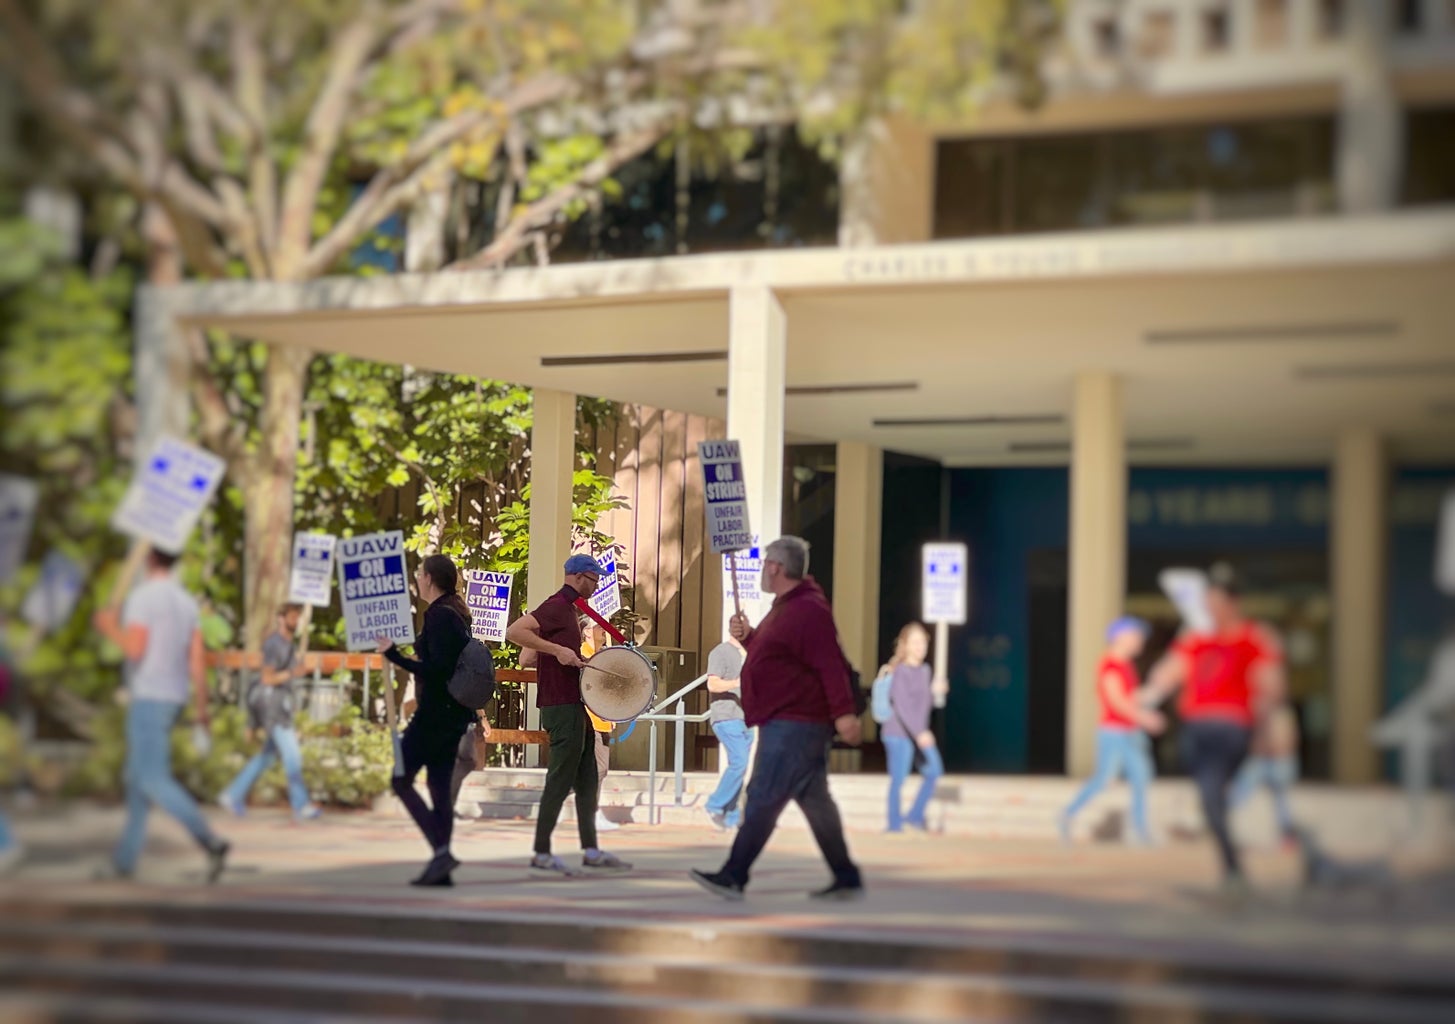 (blurred) picture of striking protestors at UCLA